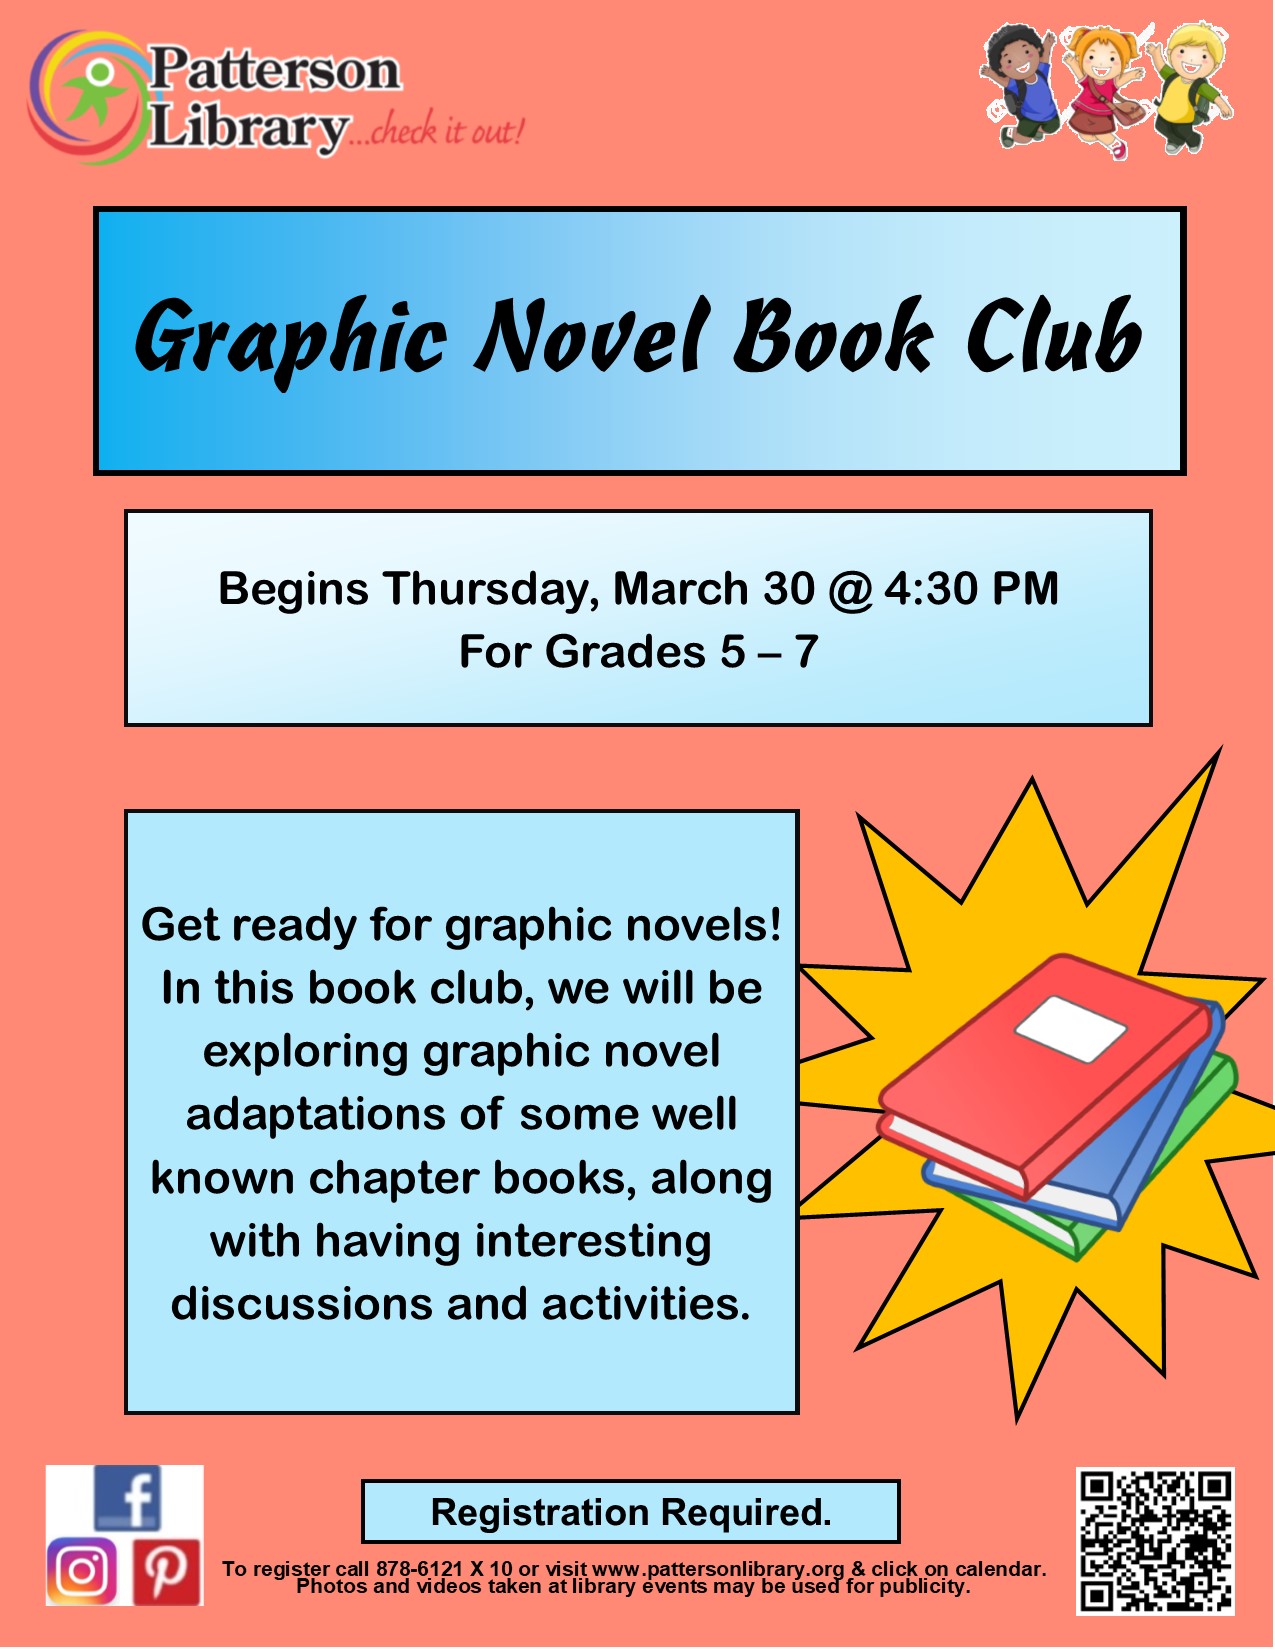 Graphic Novel Book Club. Get ready for graphic novels! In this book club, we will be exploring graphic novel adaptations of some well known chapter books, along with having interesting discussions and activities.